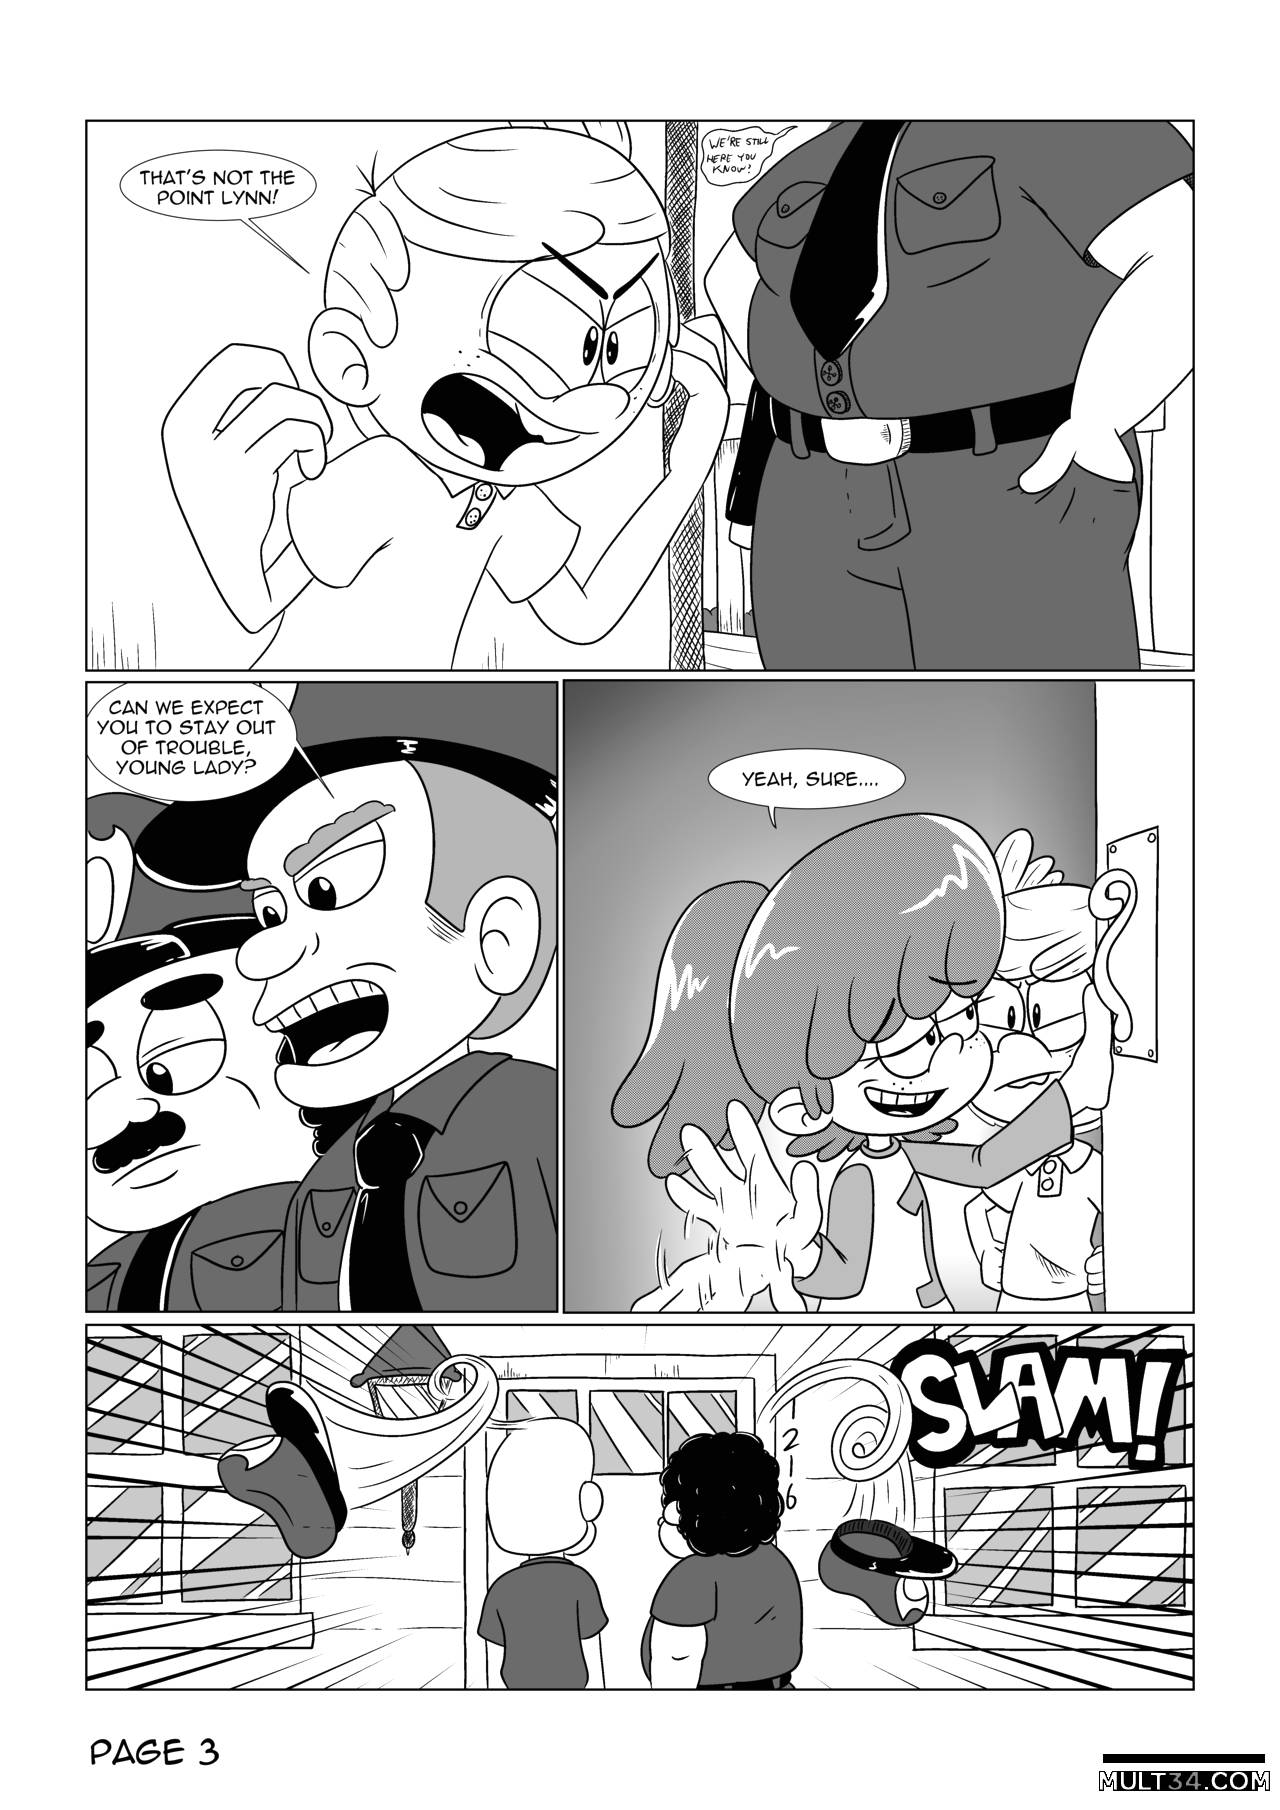 The loud house comic, chapter 3 page 4